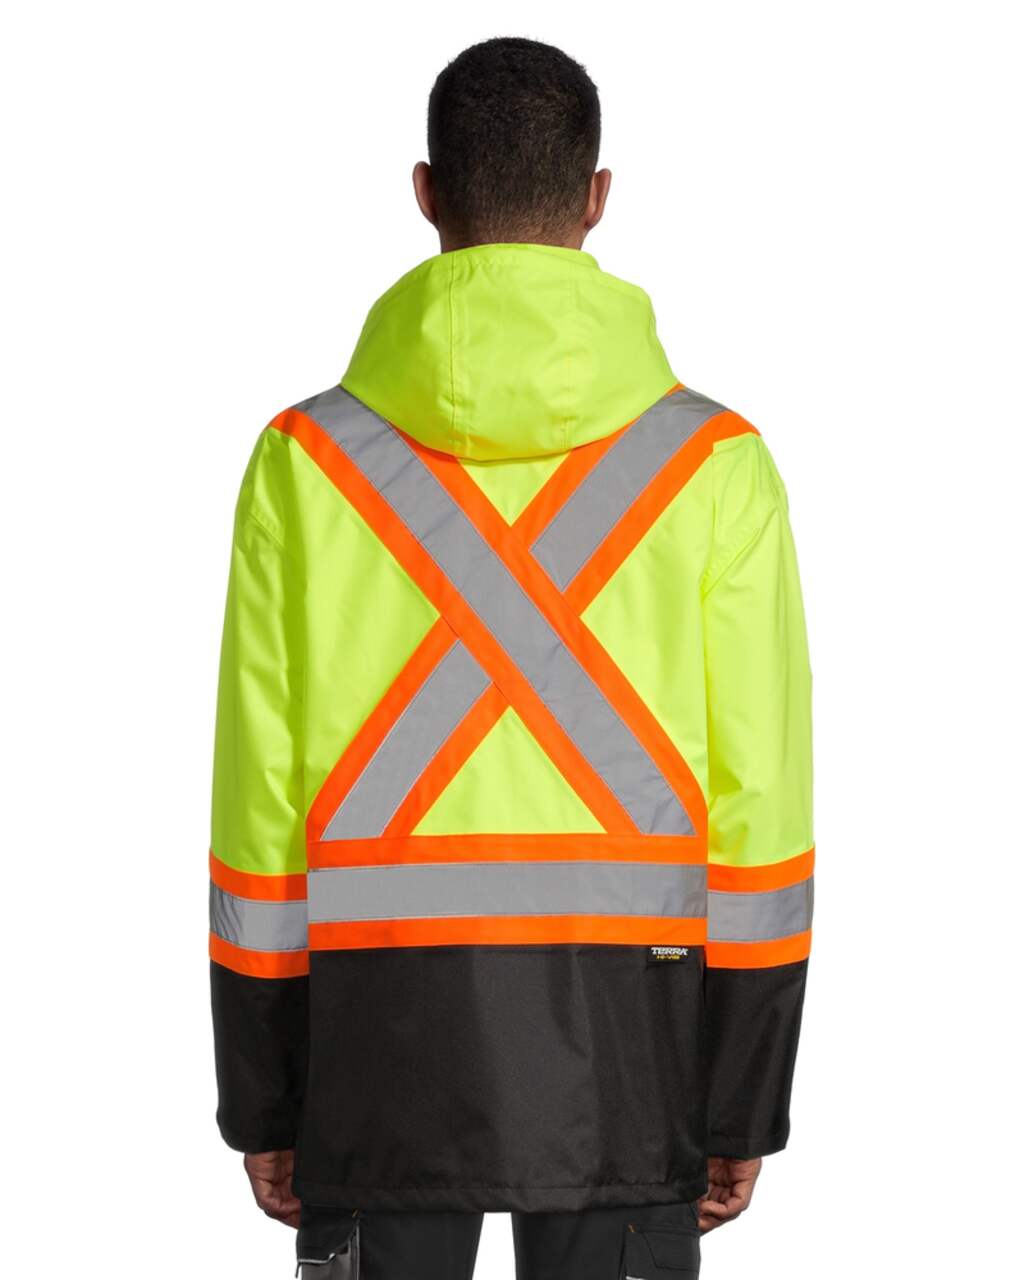 Terra Hi-Vis Rain Jacket with Reflective Tape and Removable Hood, Yellow